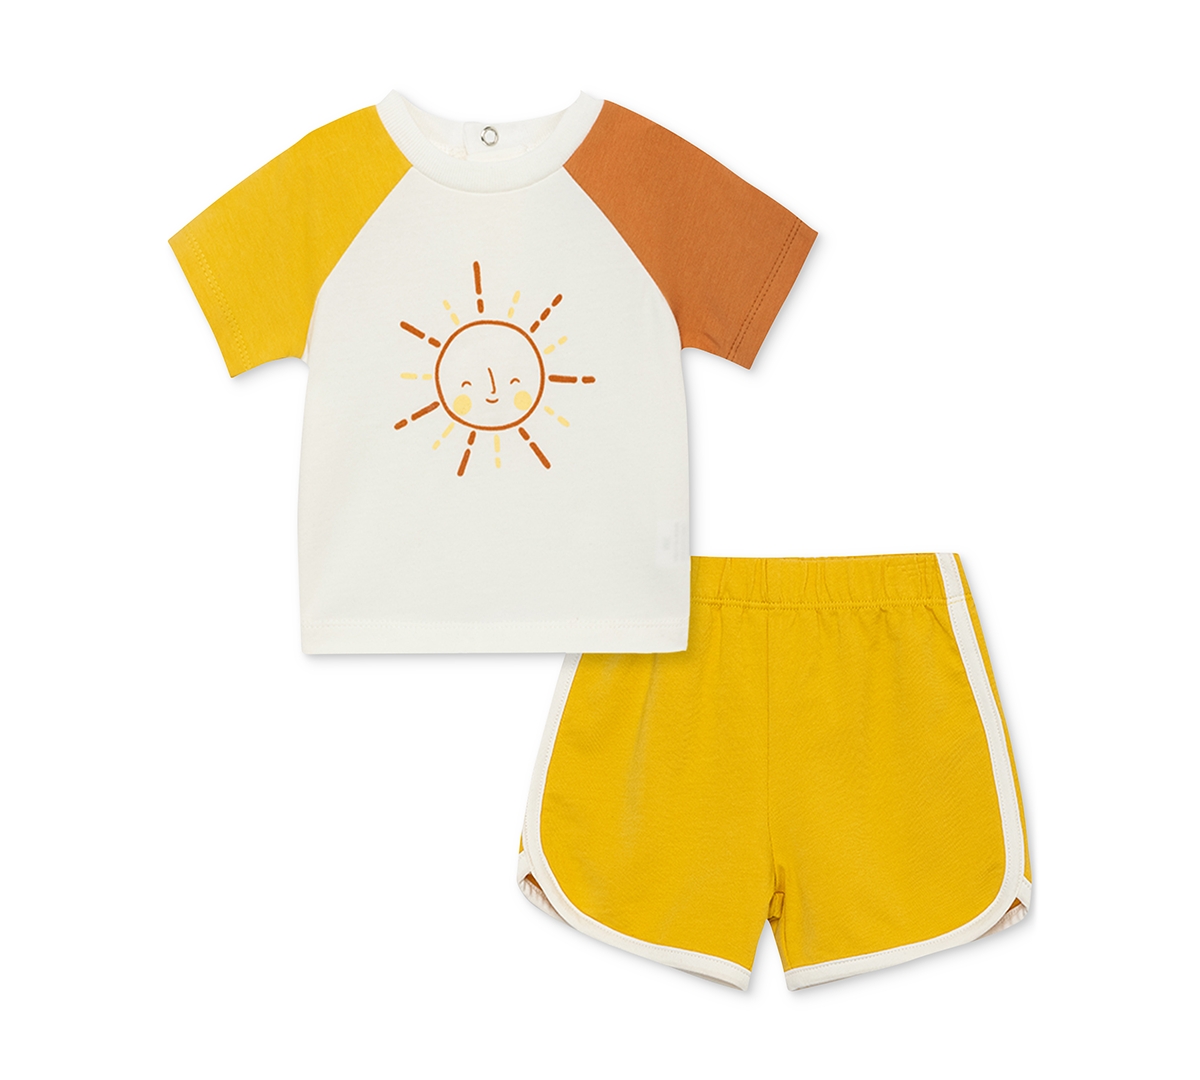 Focus Baby Boys Or Baby Girls Graphic T Shirt And Shorts, 2 Piece Set In Pastel Yellow